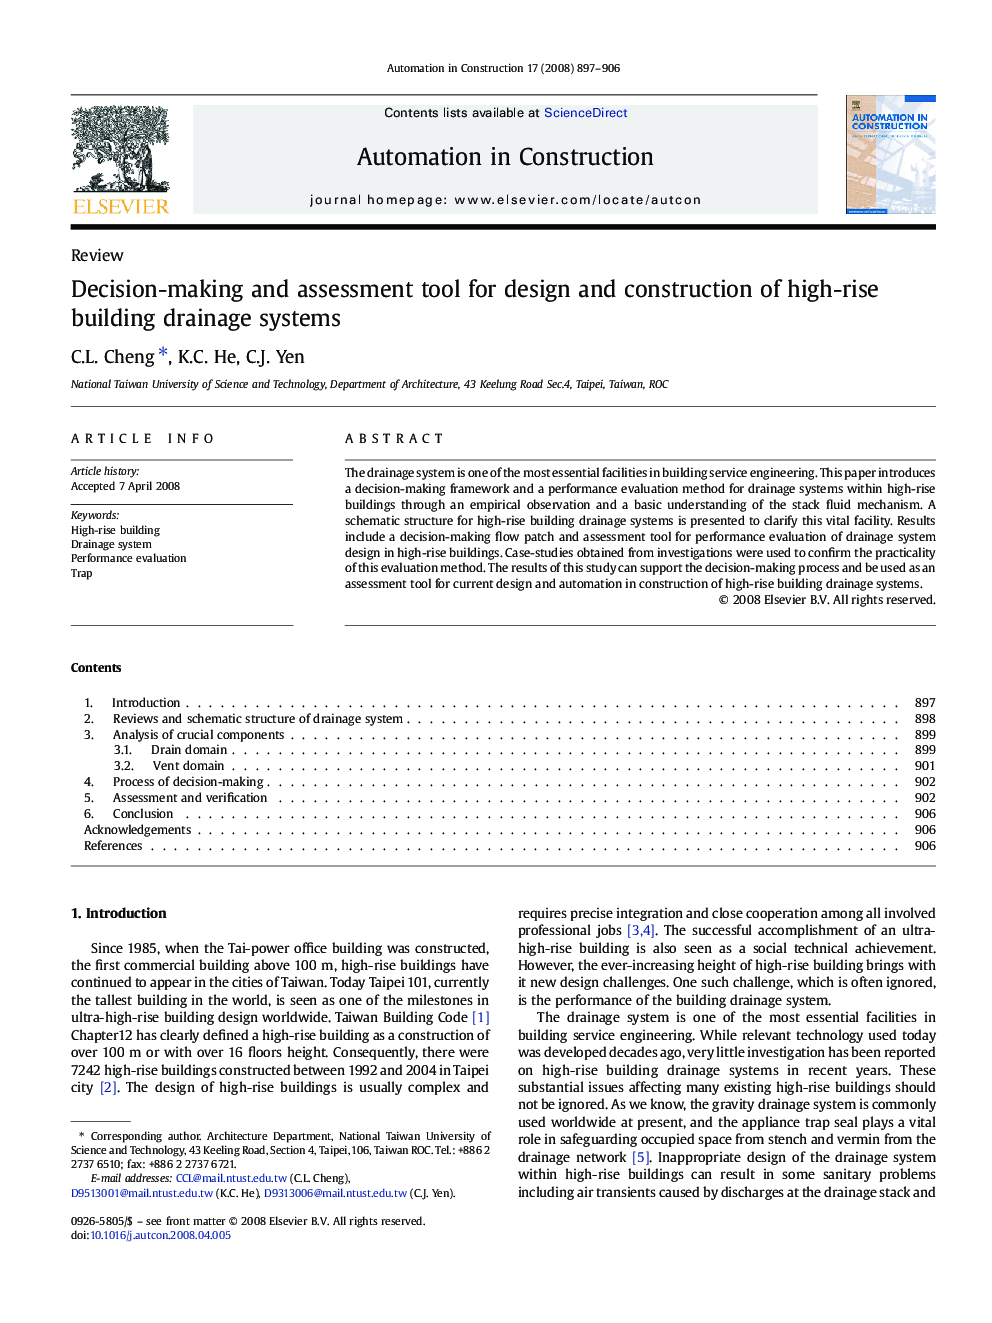 Decision-making and assessment tool for design and construction of high-rise building drainage systems